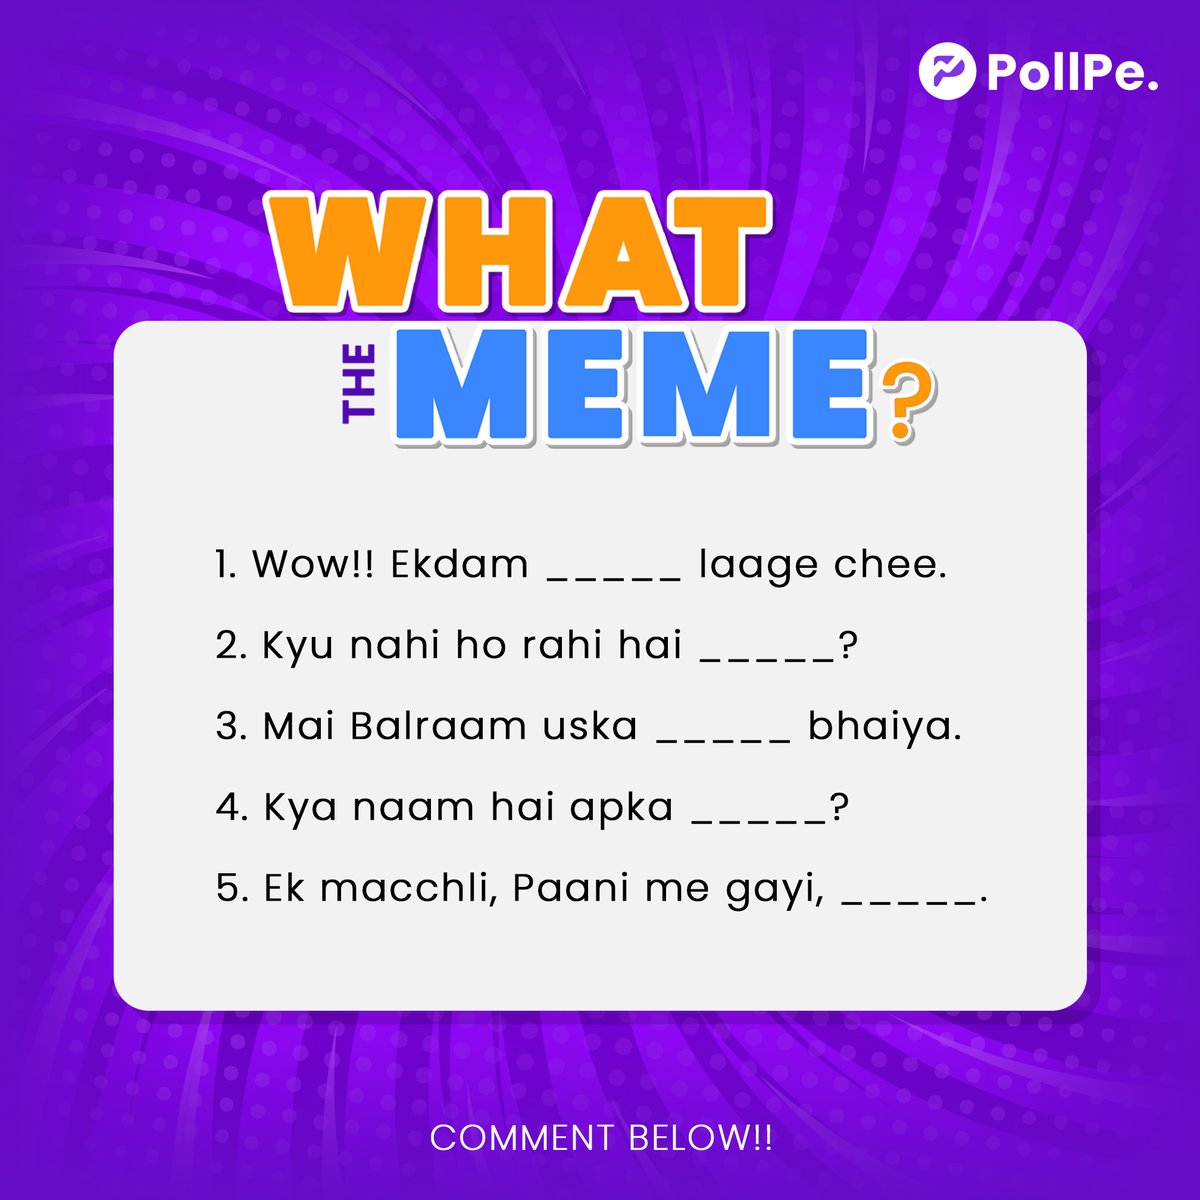 How many did you get right? 🧐😂 Comments me batao 🙌...

#trend #memes #trending #instagramfeed #feed #funny #reach #instagram #wowww #reels #instagramreel #hot #popular #new #comment #follow #money #opinions #surveys #rewards #gifts